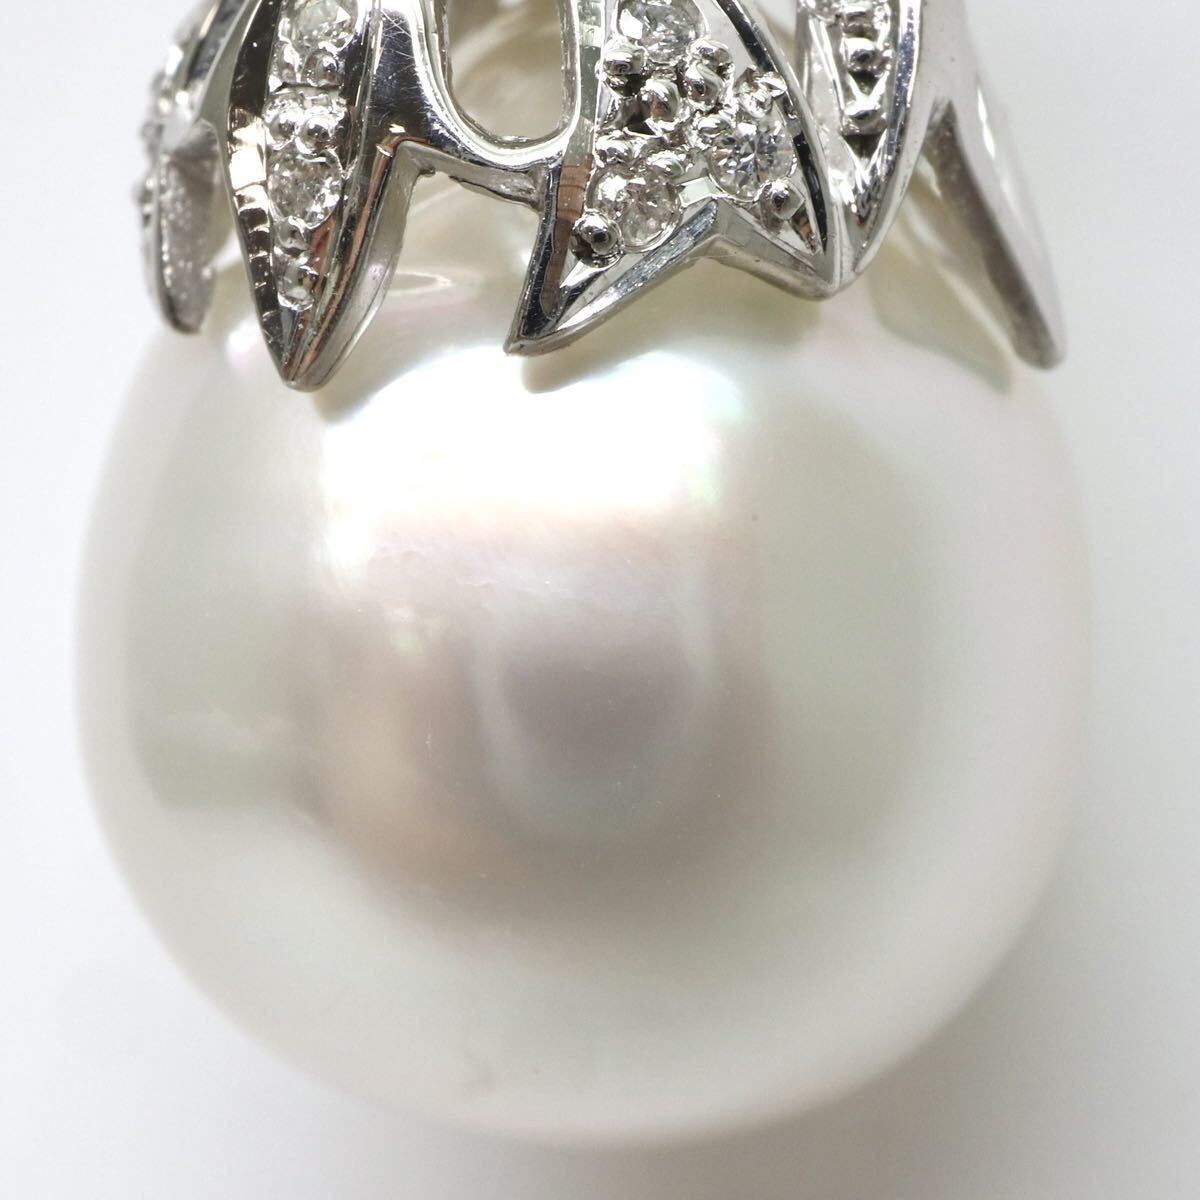  gorgeous!!*Pt900 south . White Butterfly pearl / natural diamond pendant top *M* approximately 9.6g 15.0mm. pearl pearl diamond jewelry necklace ED6/ED6